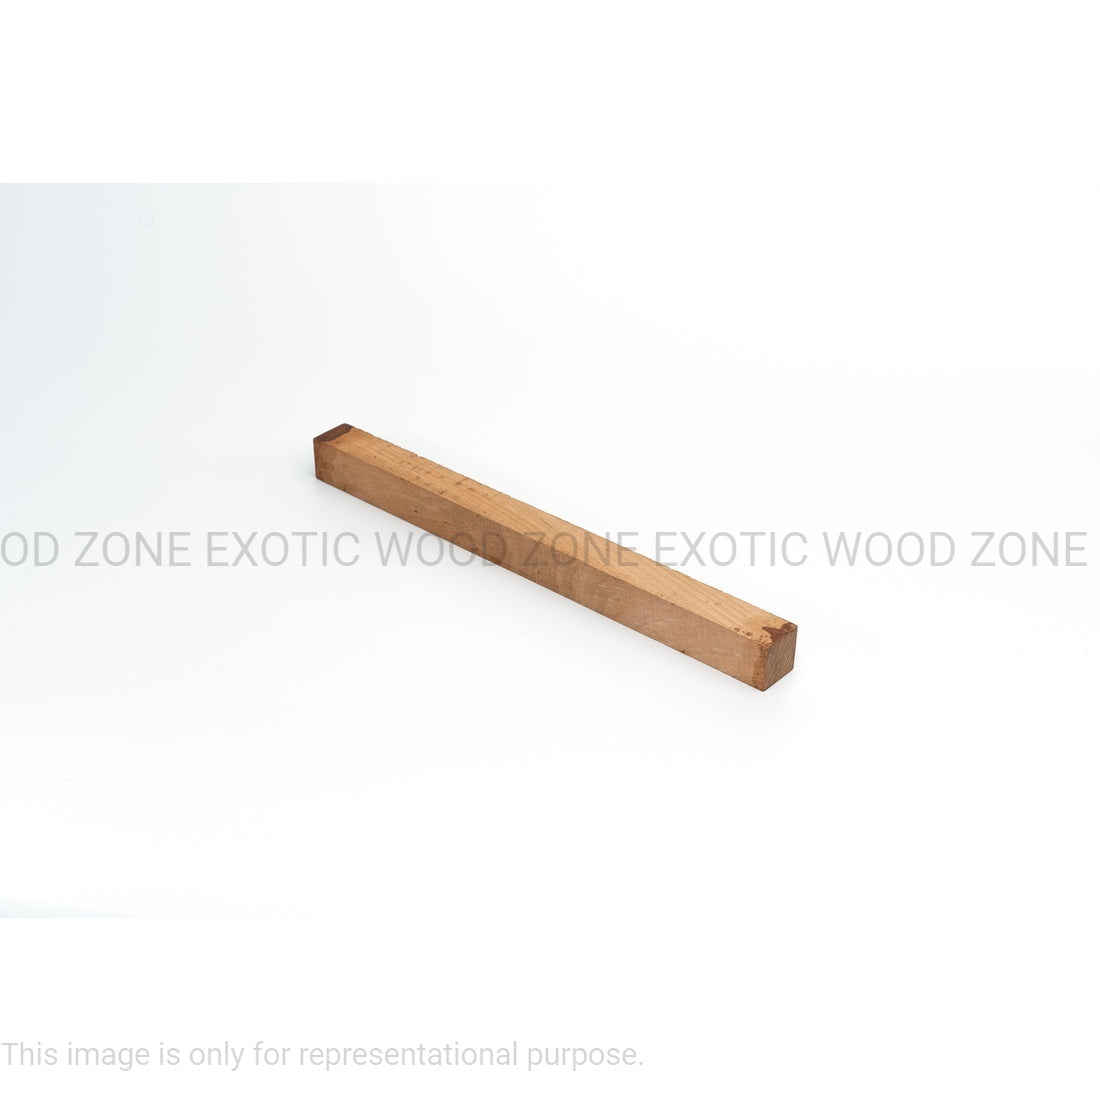 Cherry Hobby Wood/ Turning Wood Blanks 1 x 1 x 12 inches - Exotic Wood Zone - Buy online Across USA 